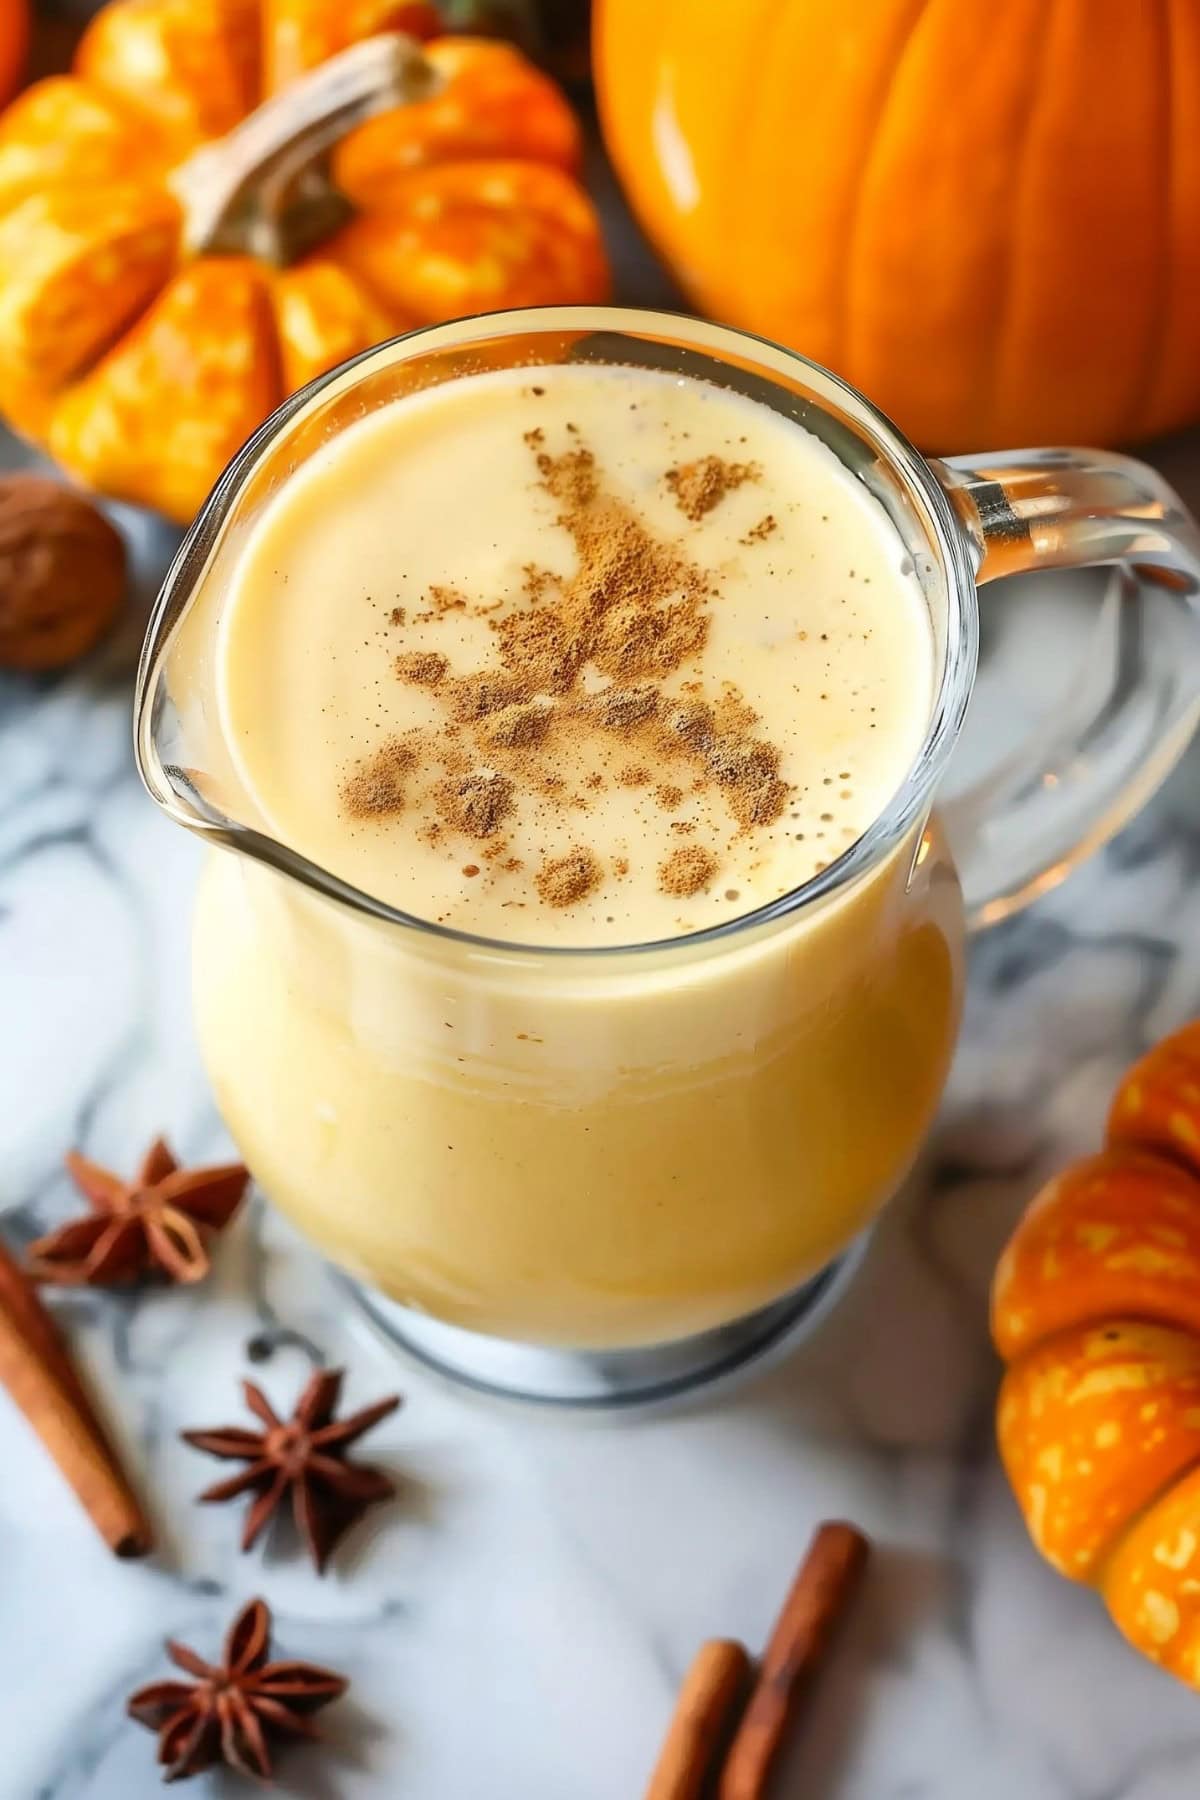 Homemade pumpkin eggnog in a pitcher glass, made with eggs, puree and half-and-half